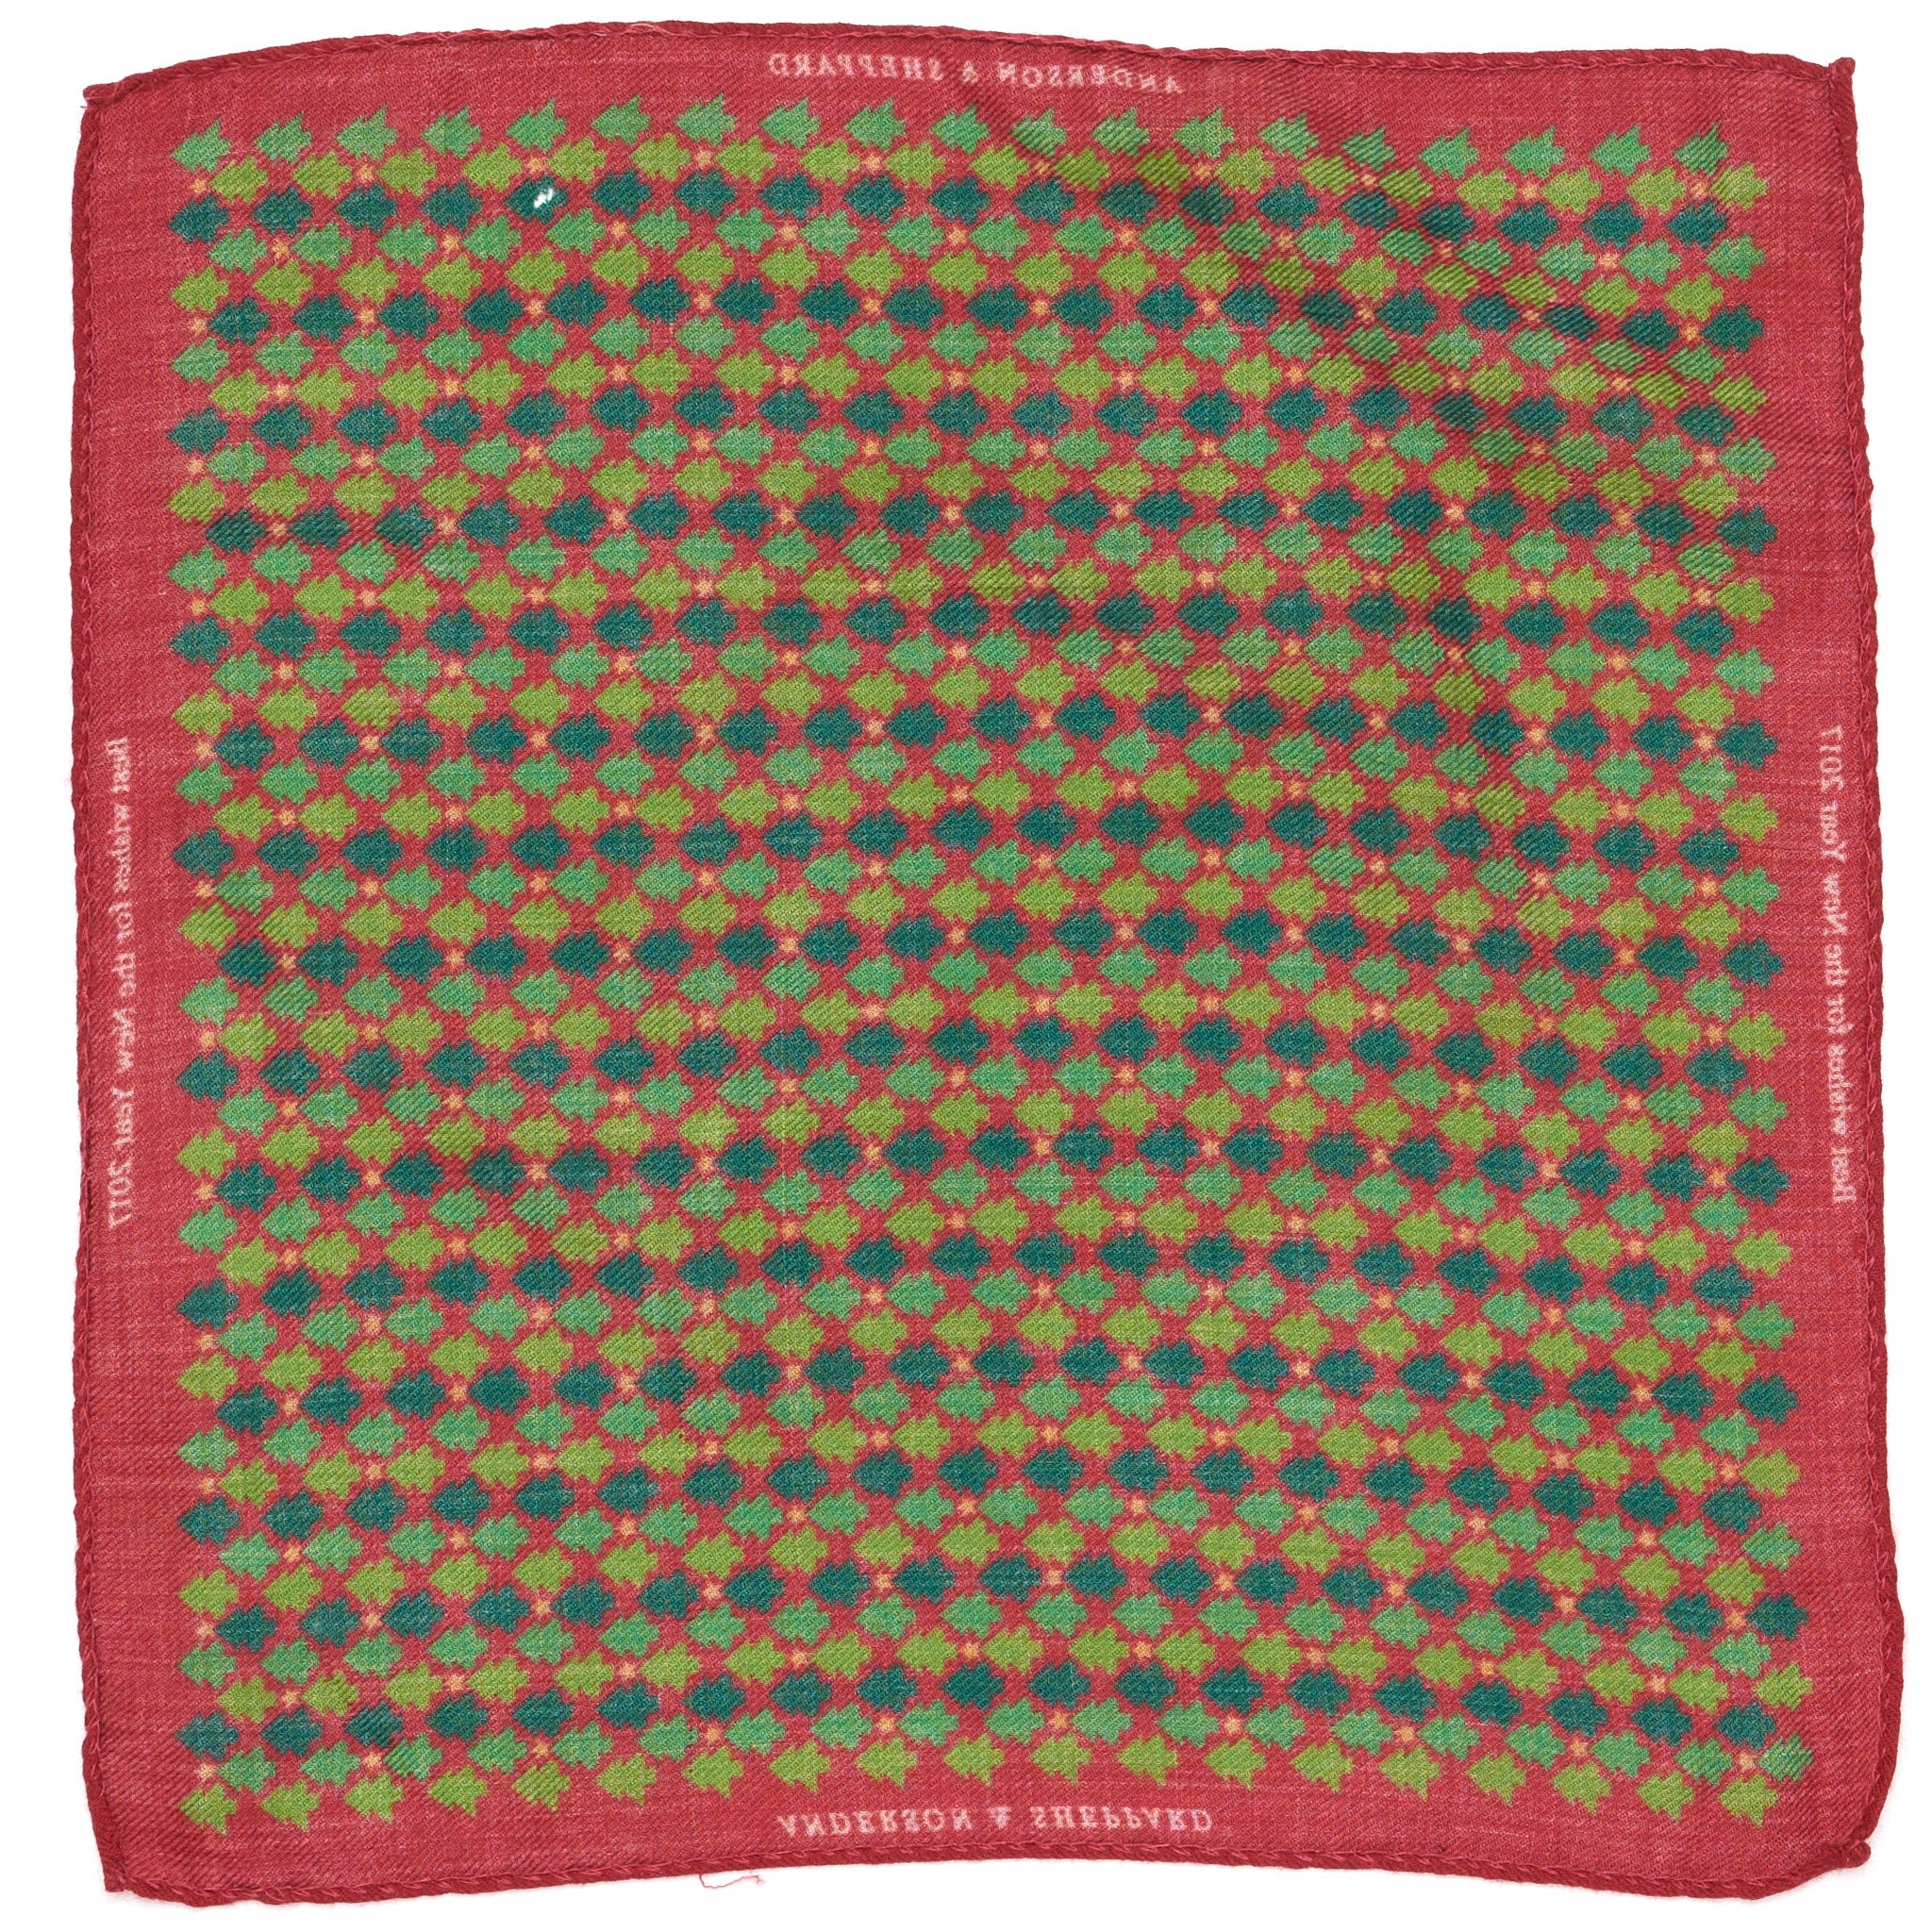 ANDERSON & SHEPPARD "NEW YEAR 2017" Red Pine Star Cotton Pocket Square